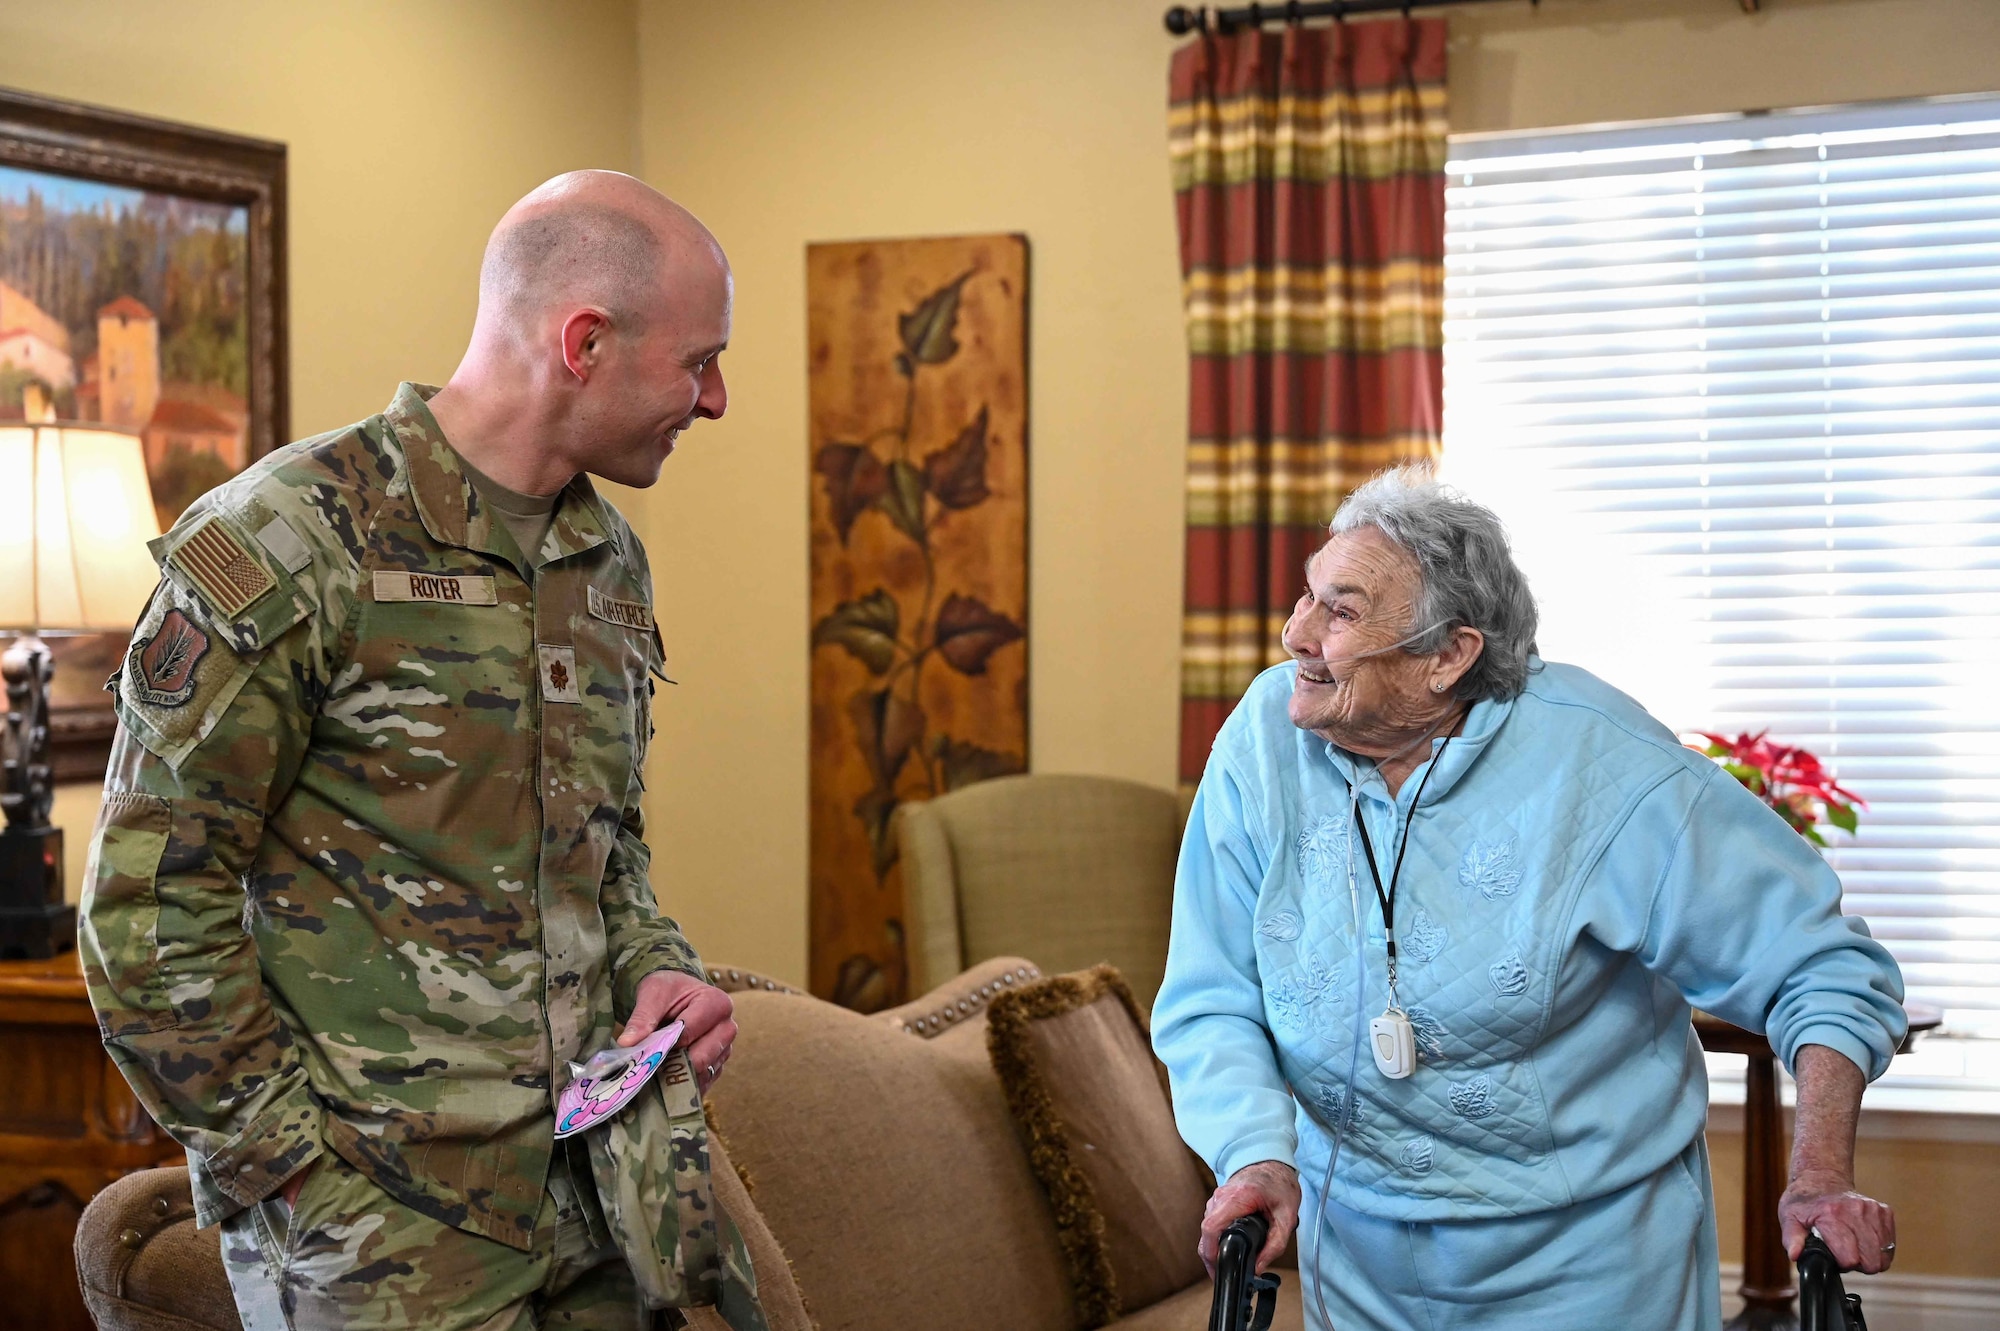 U.S. Air Force Maj. Nathan Royer, 97th Air Mobility Wing deputy staff judge advocate, talks with Eva M. Price, an Air Force veteran, at Tamarack Assisted Living in Altus, Oklahoma, Feb. 14,2024. Price served in the Air Force for two years in a communications squadron. (U.S. Air Force photo by Airman 1st Class Kari Degraffenreed)